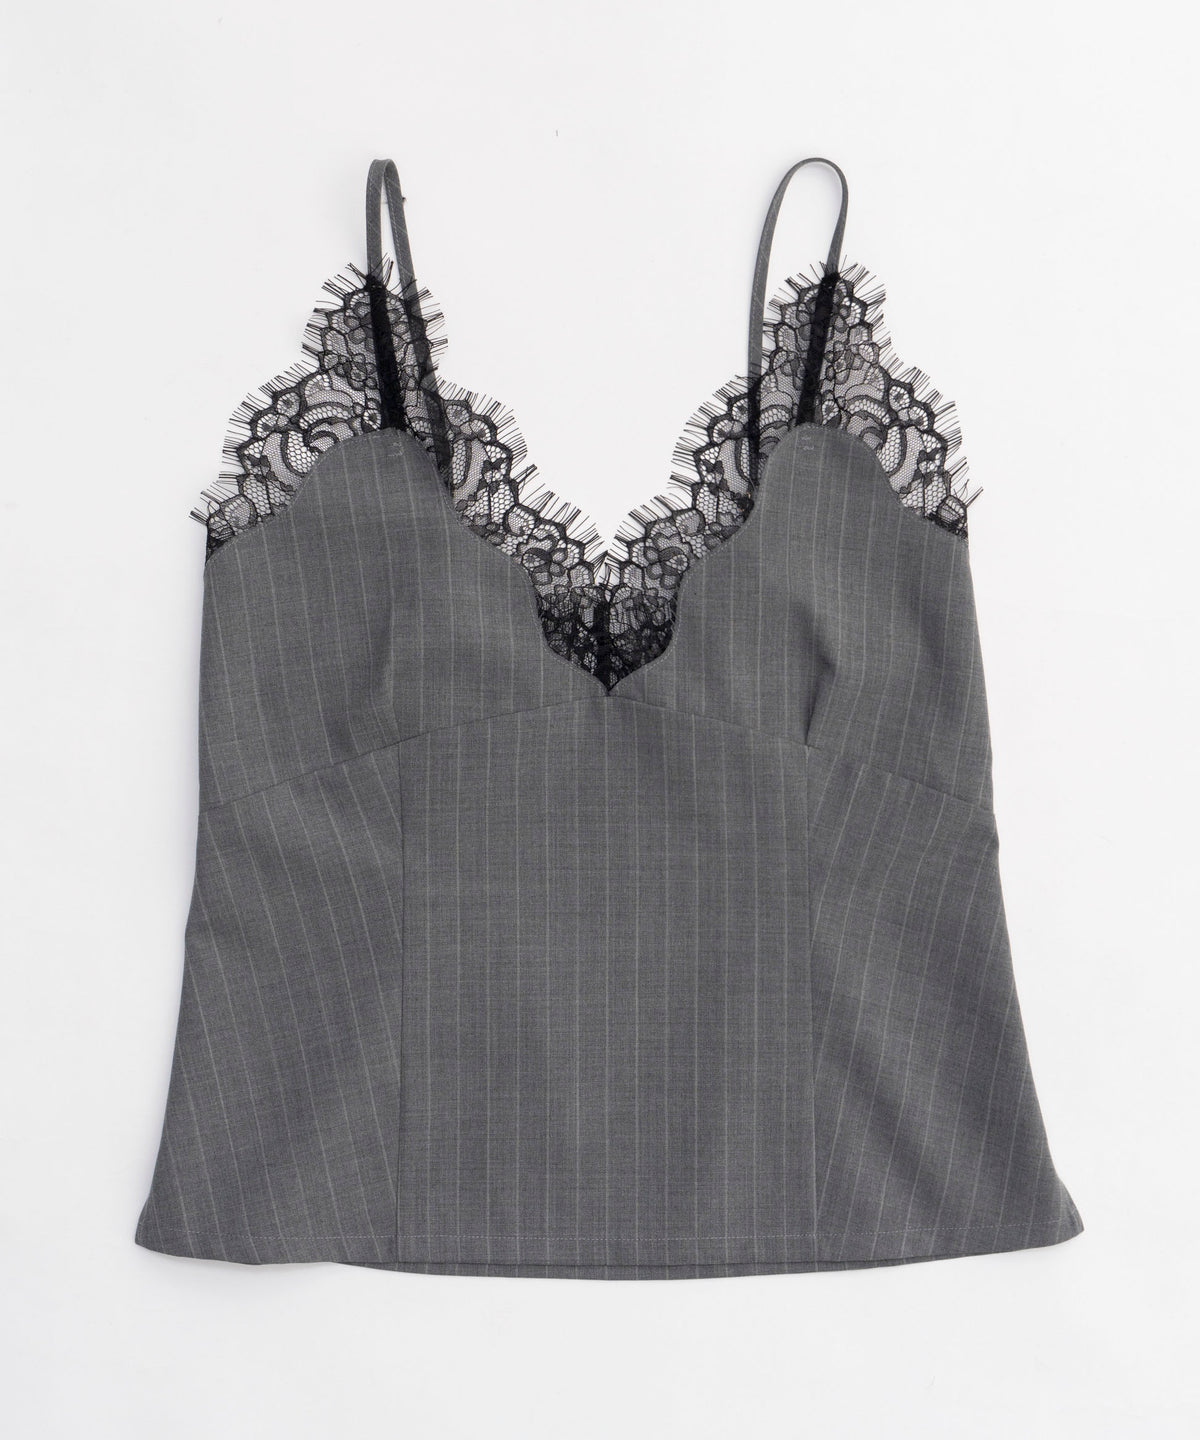 Pinstripe Lace Camisole